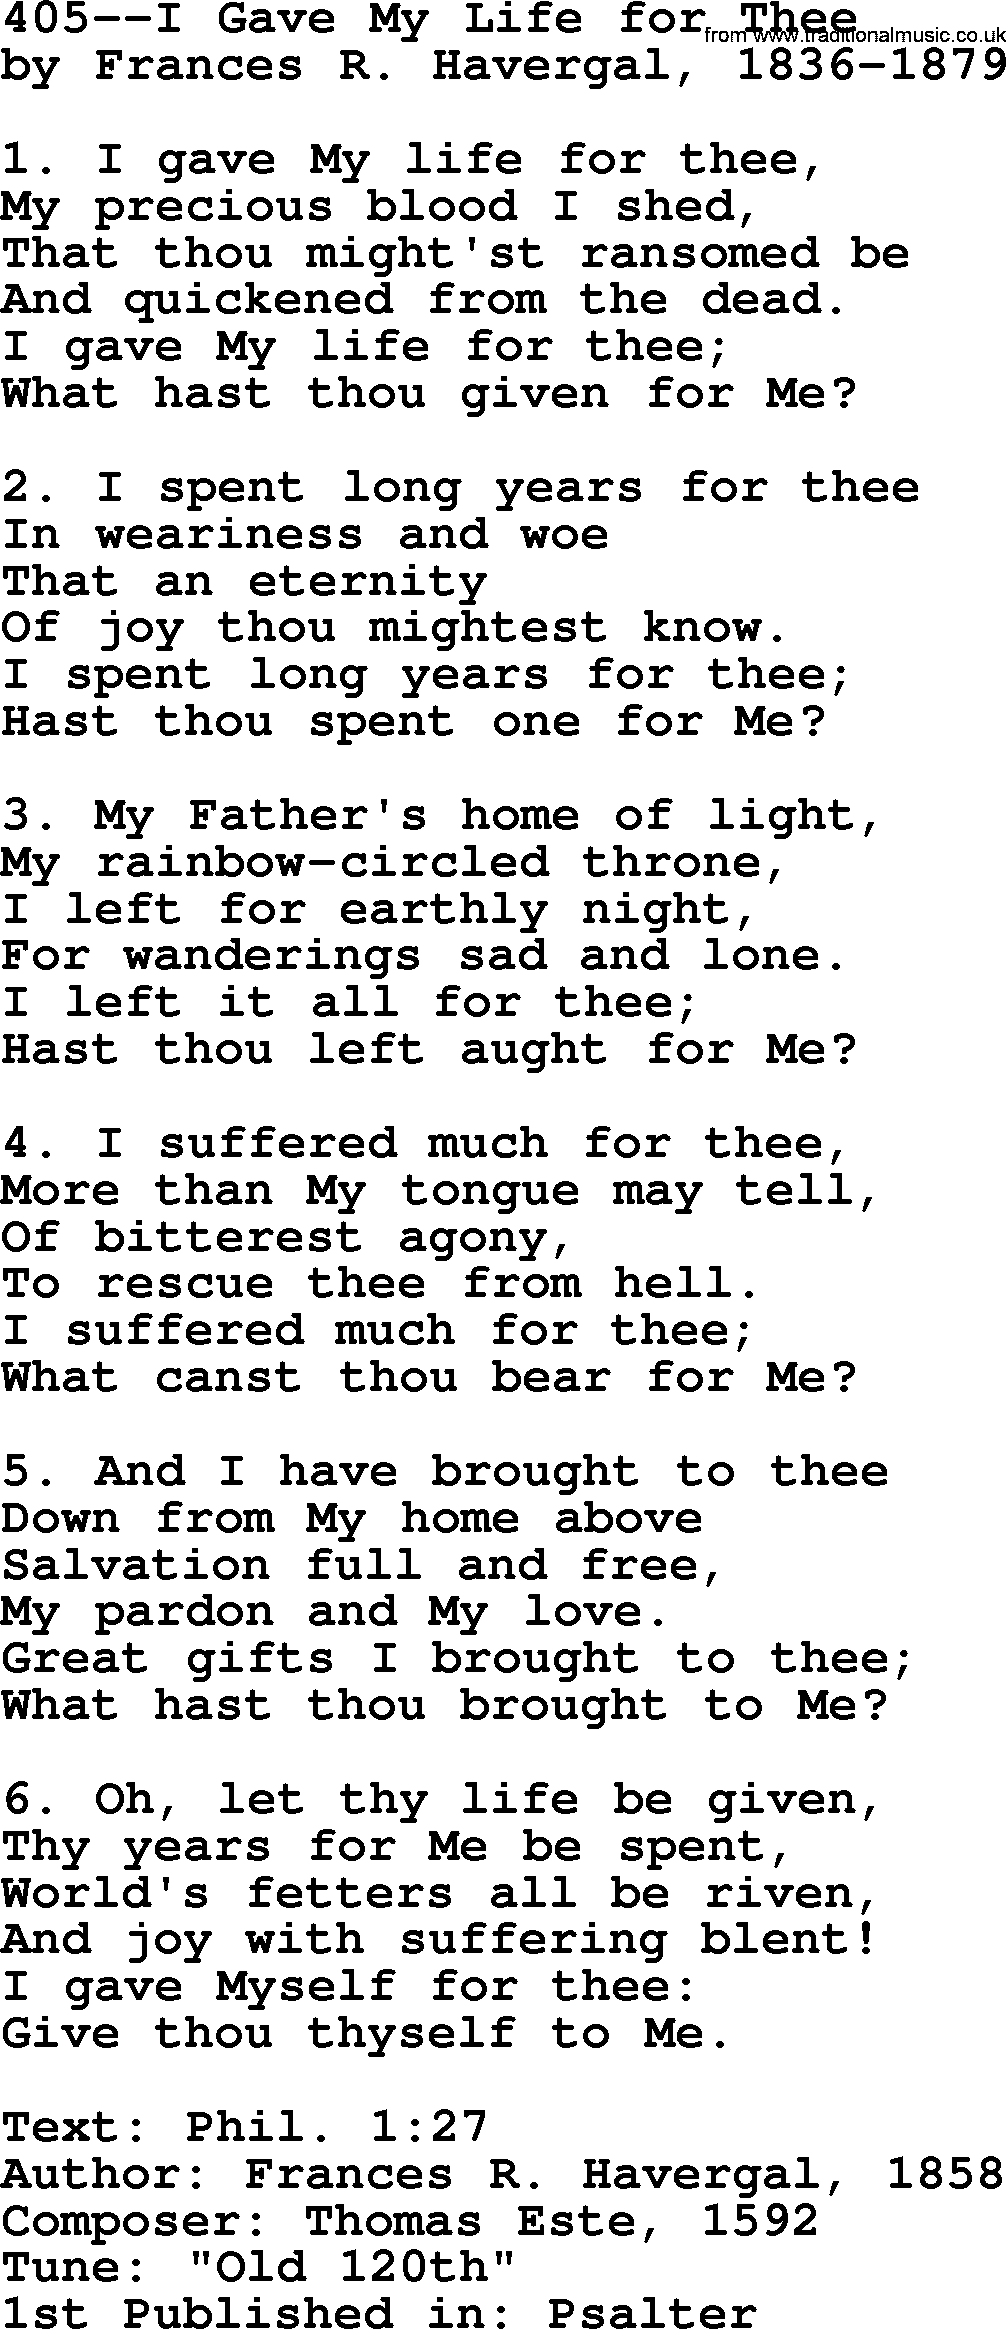 Lutheran Hymn: 405--I Gave My Life for Thee.txt lyrics with PDF